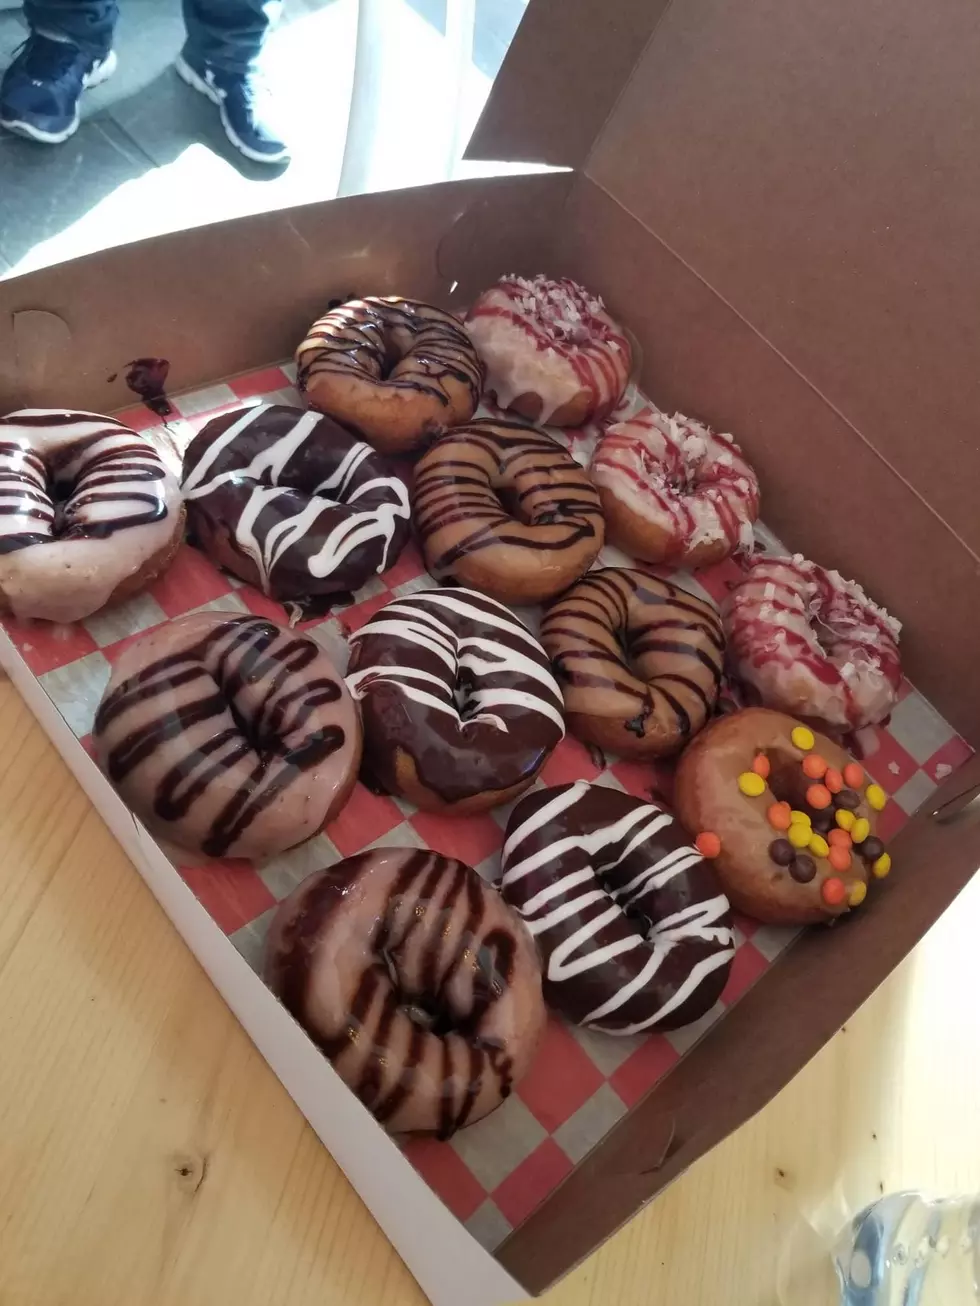 Lakeside Licks in Highland Expands With Donut Business